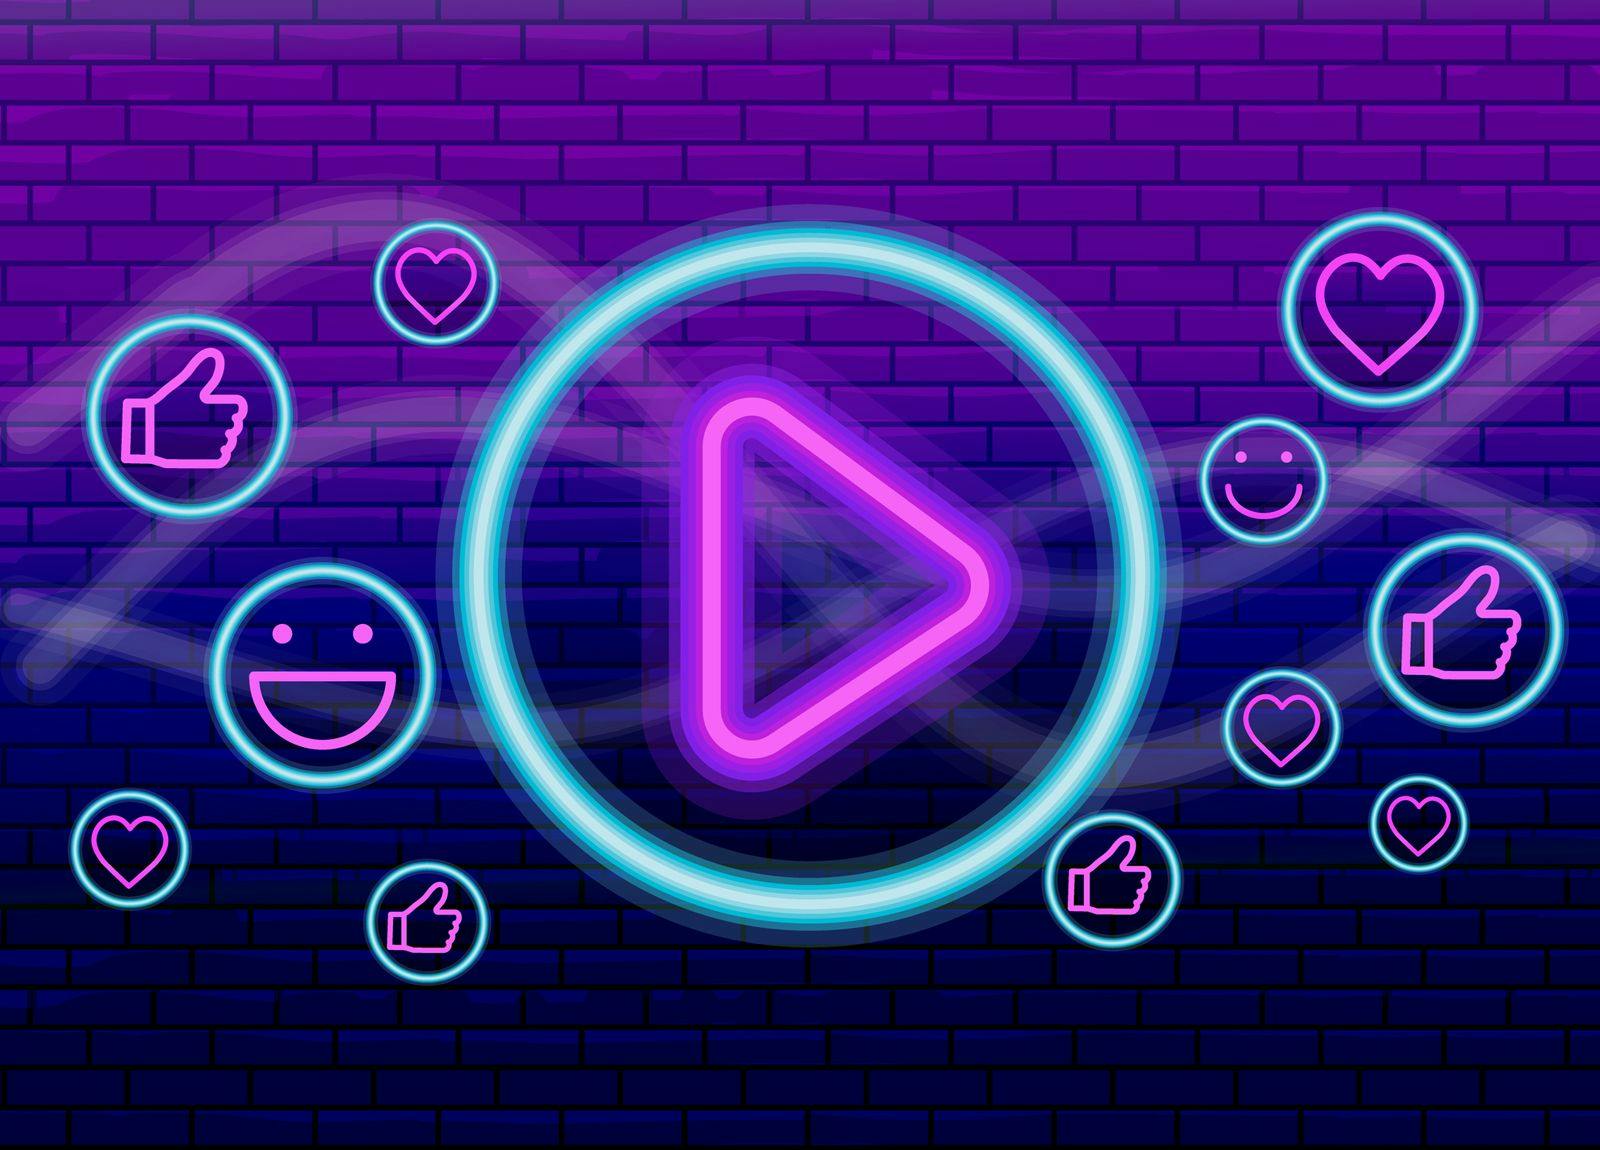 Neon glowing online reaction buttons including a large central play button, a smiley face, thumbs up, and heart